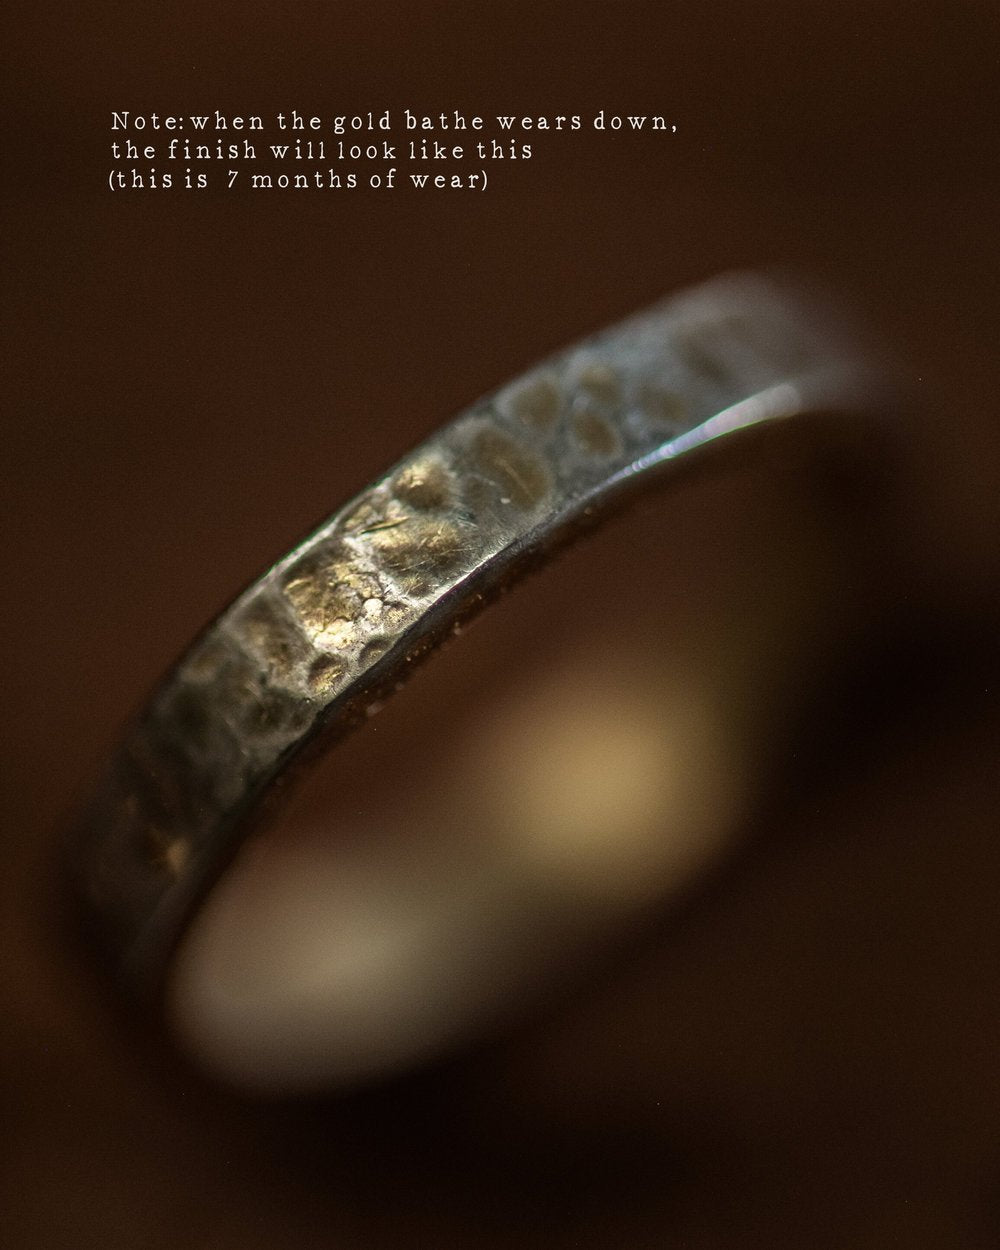 1924us Signature 'Onward' Engraved Sterling Silver Ring Bathed in Gold